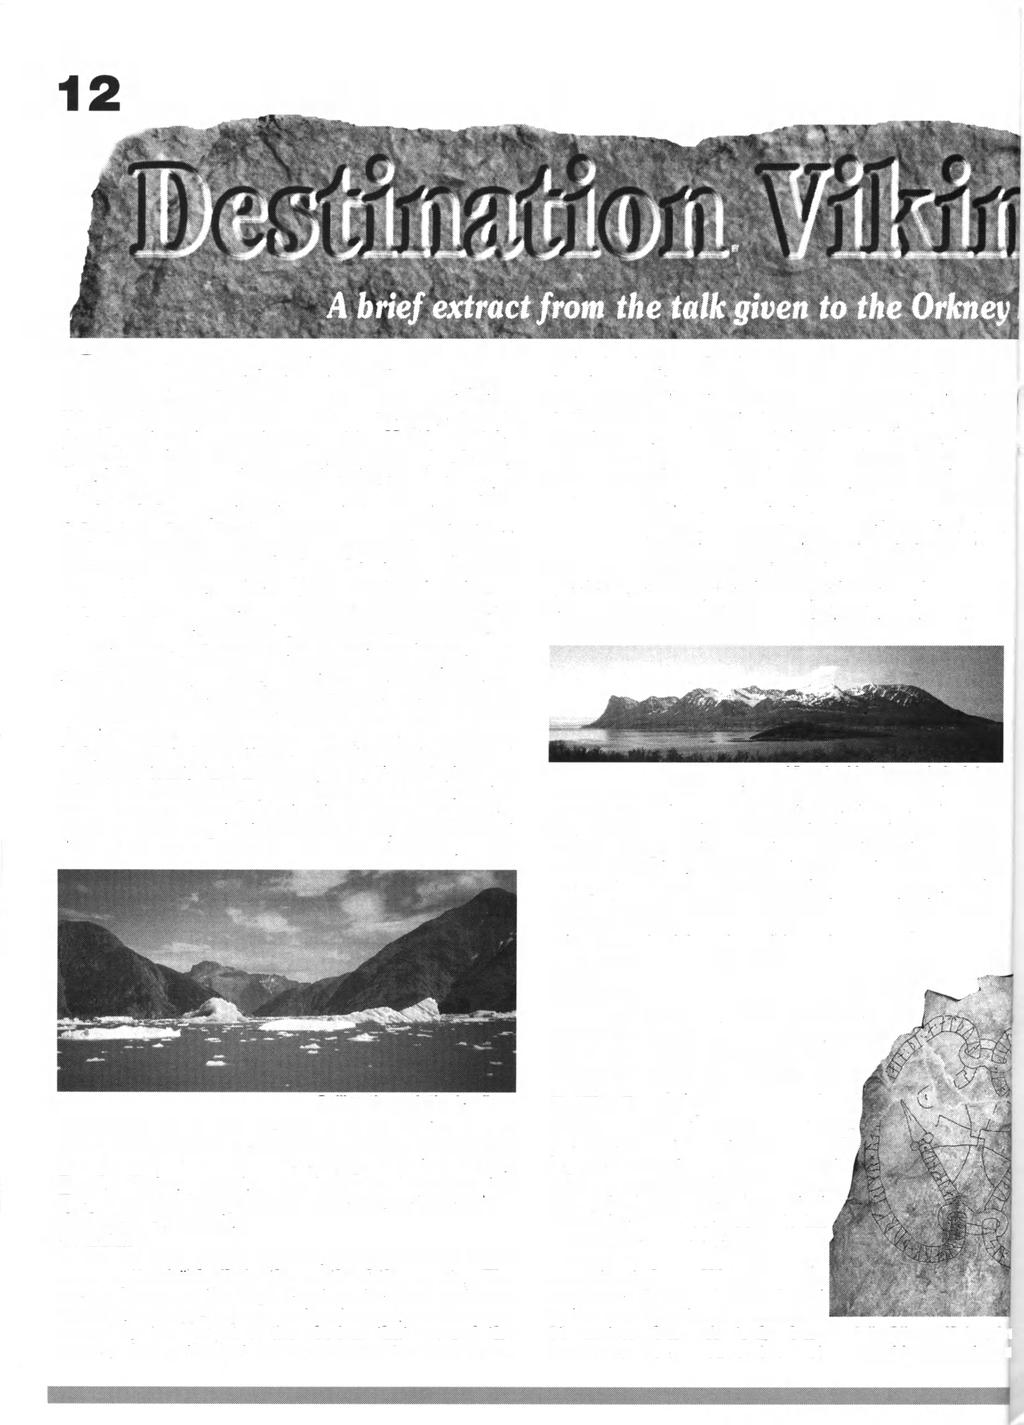 NEWSLETTER OF THE ORKNEY FAMILY HISTORY SOCIETY Over the last three years the Orkney Museums and Heritage Department of the OIC has played a major role in an EU project called Destination Viking: The